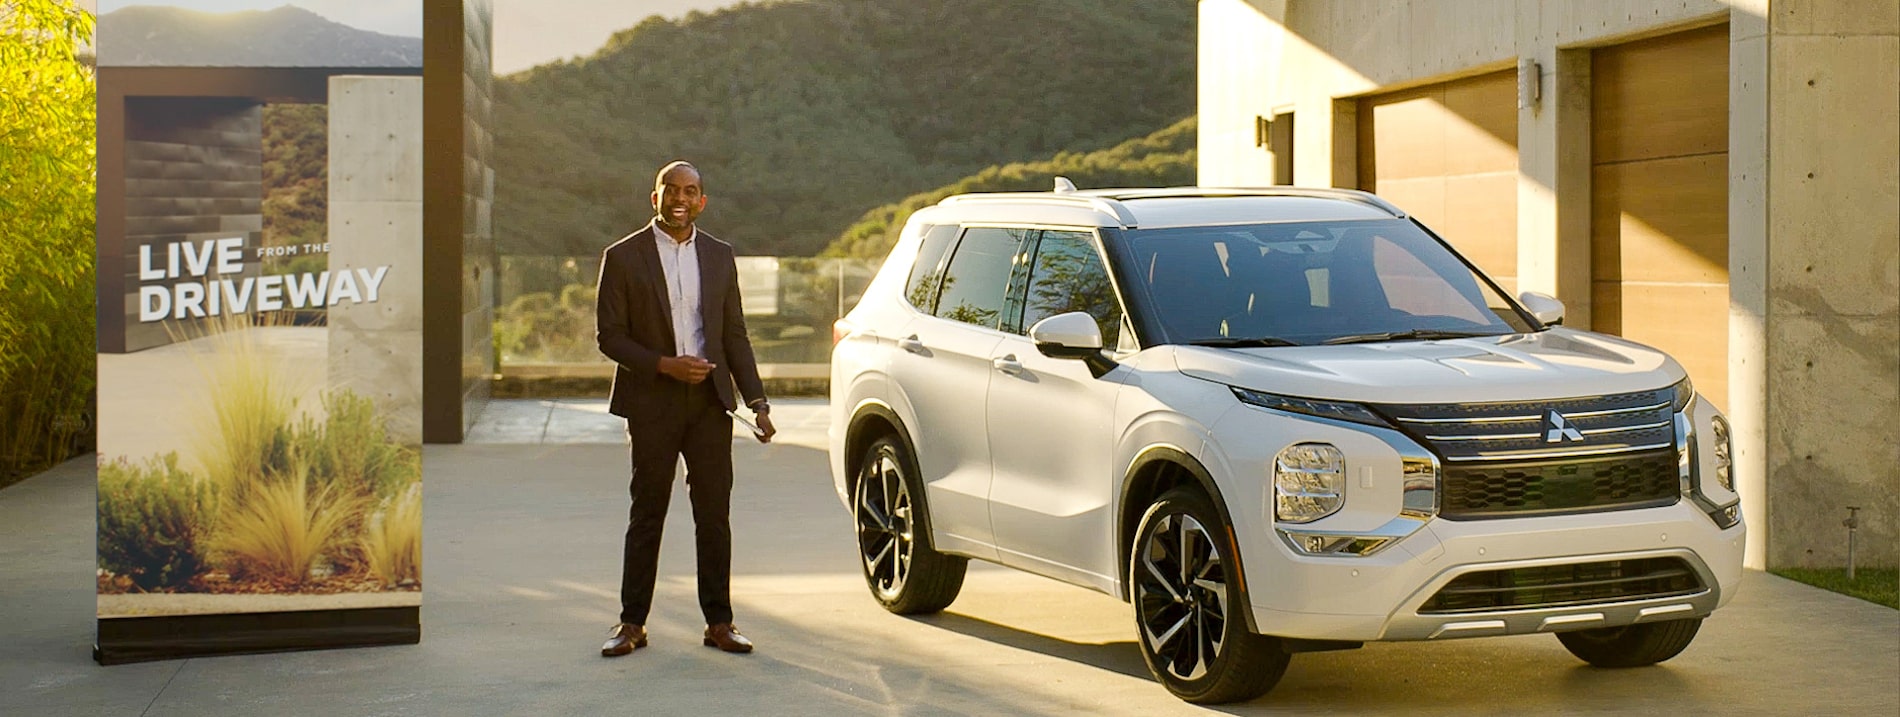 2022 Mitsubishi Outlander Live from the Driveway with Albert Lawrence